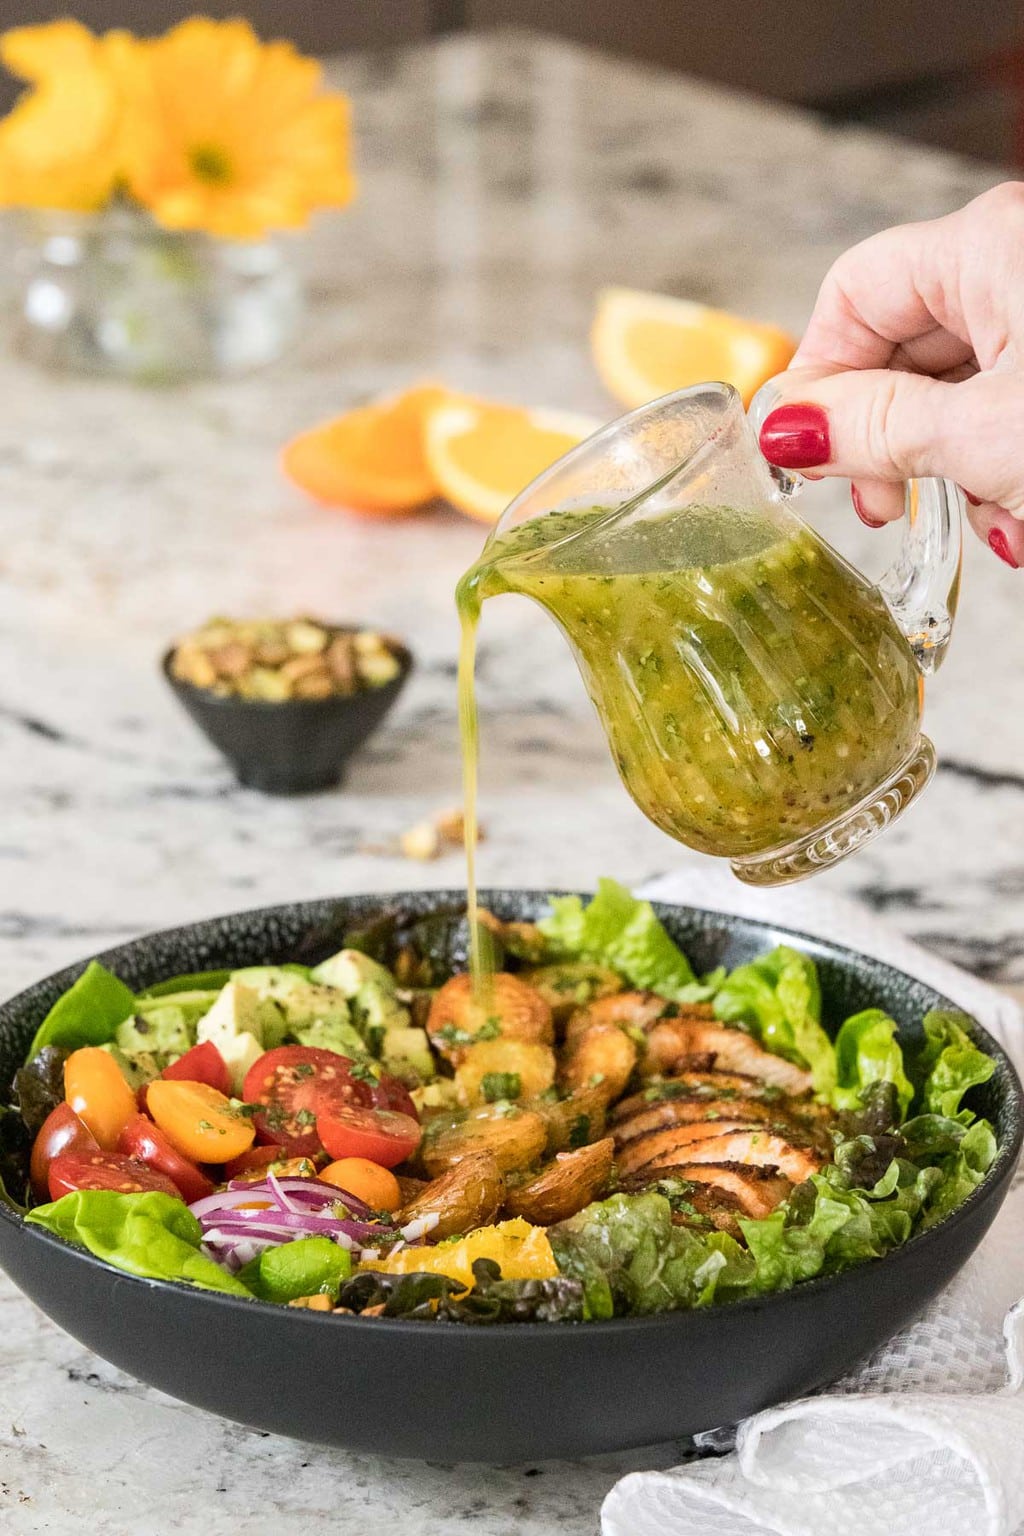 Horizontal photo of a person pouring dressing over a salad featuring Juicy Tender Restaurant Style Chicken Breasts in a black serving bowl on a granite countertop.